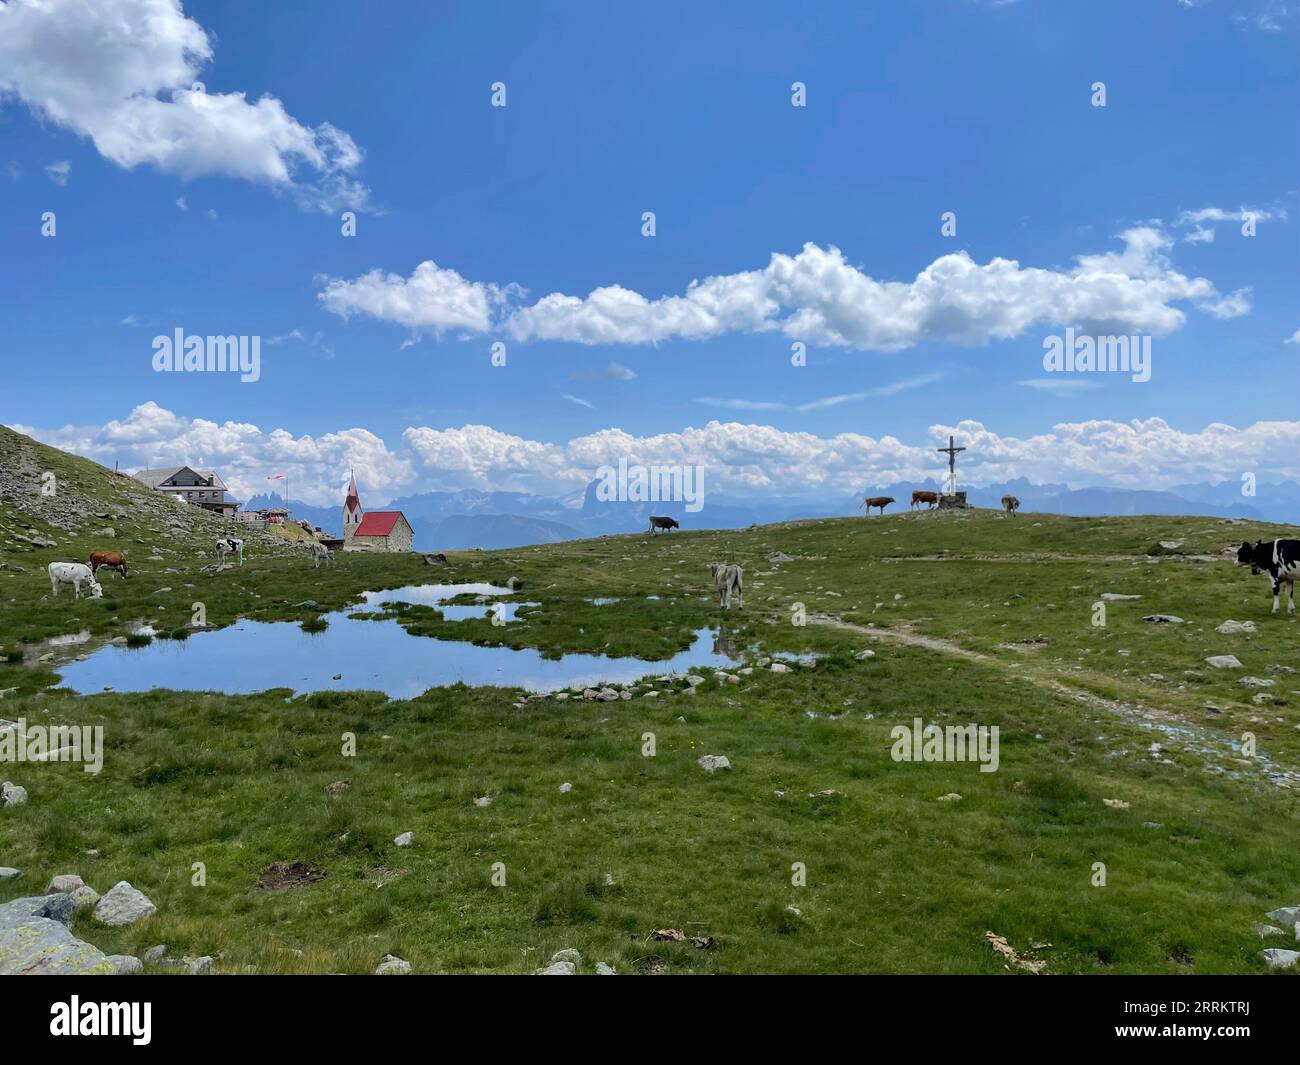 Hike to Latzfons Cross in South Tyrol, summit cross, small lake, cows, pilgrimage site, Sarntal Alps, 2300 m, viewpoint, Dolomites, Klausen, Latzfons, Wipptal, sun, mountains, clouds, nature, activity, Klausen, South Tyrol, Alto Adige, Italy Stock Photo